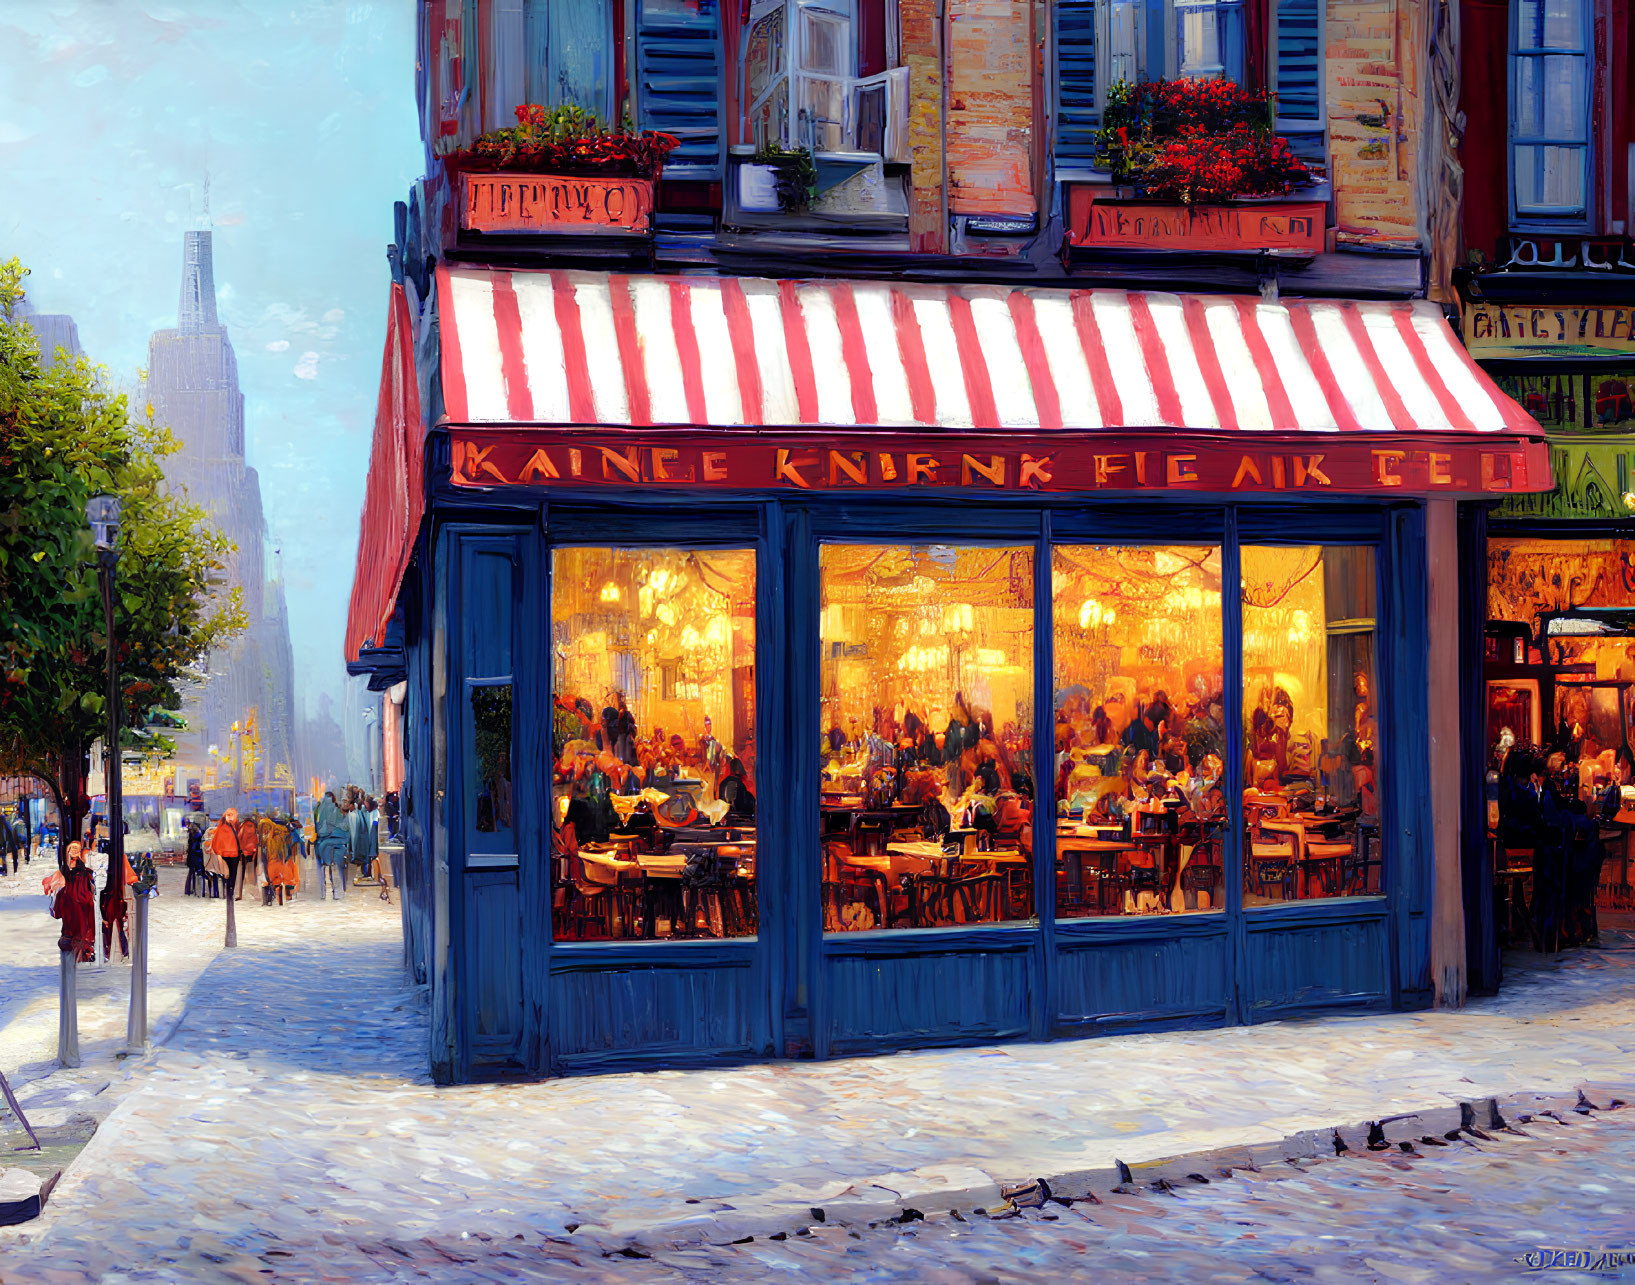 The French Café in New York